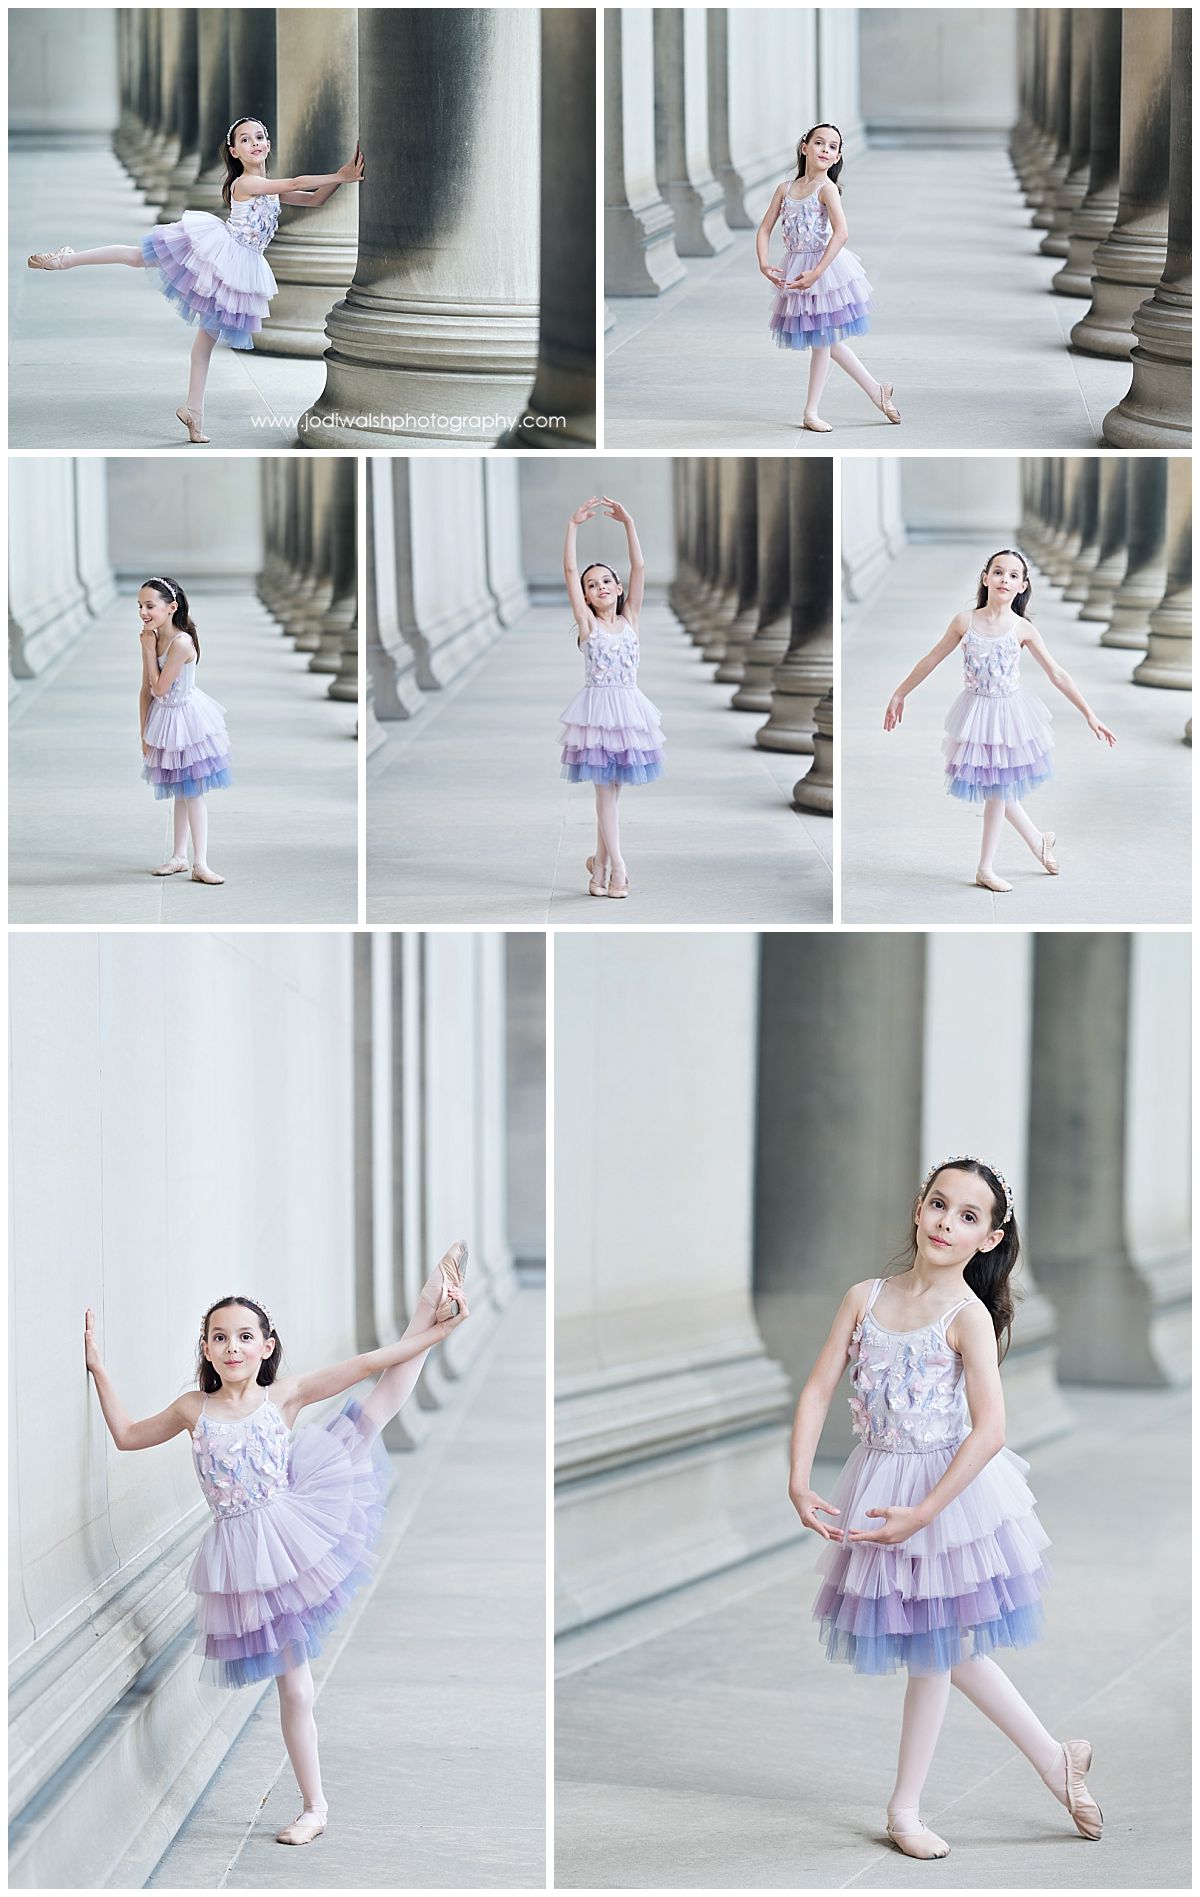 collage of images of a young girl with long dark hair, wearing a pink and violet tulle dress, dancing in a long hallway with stone columns